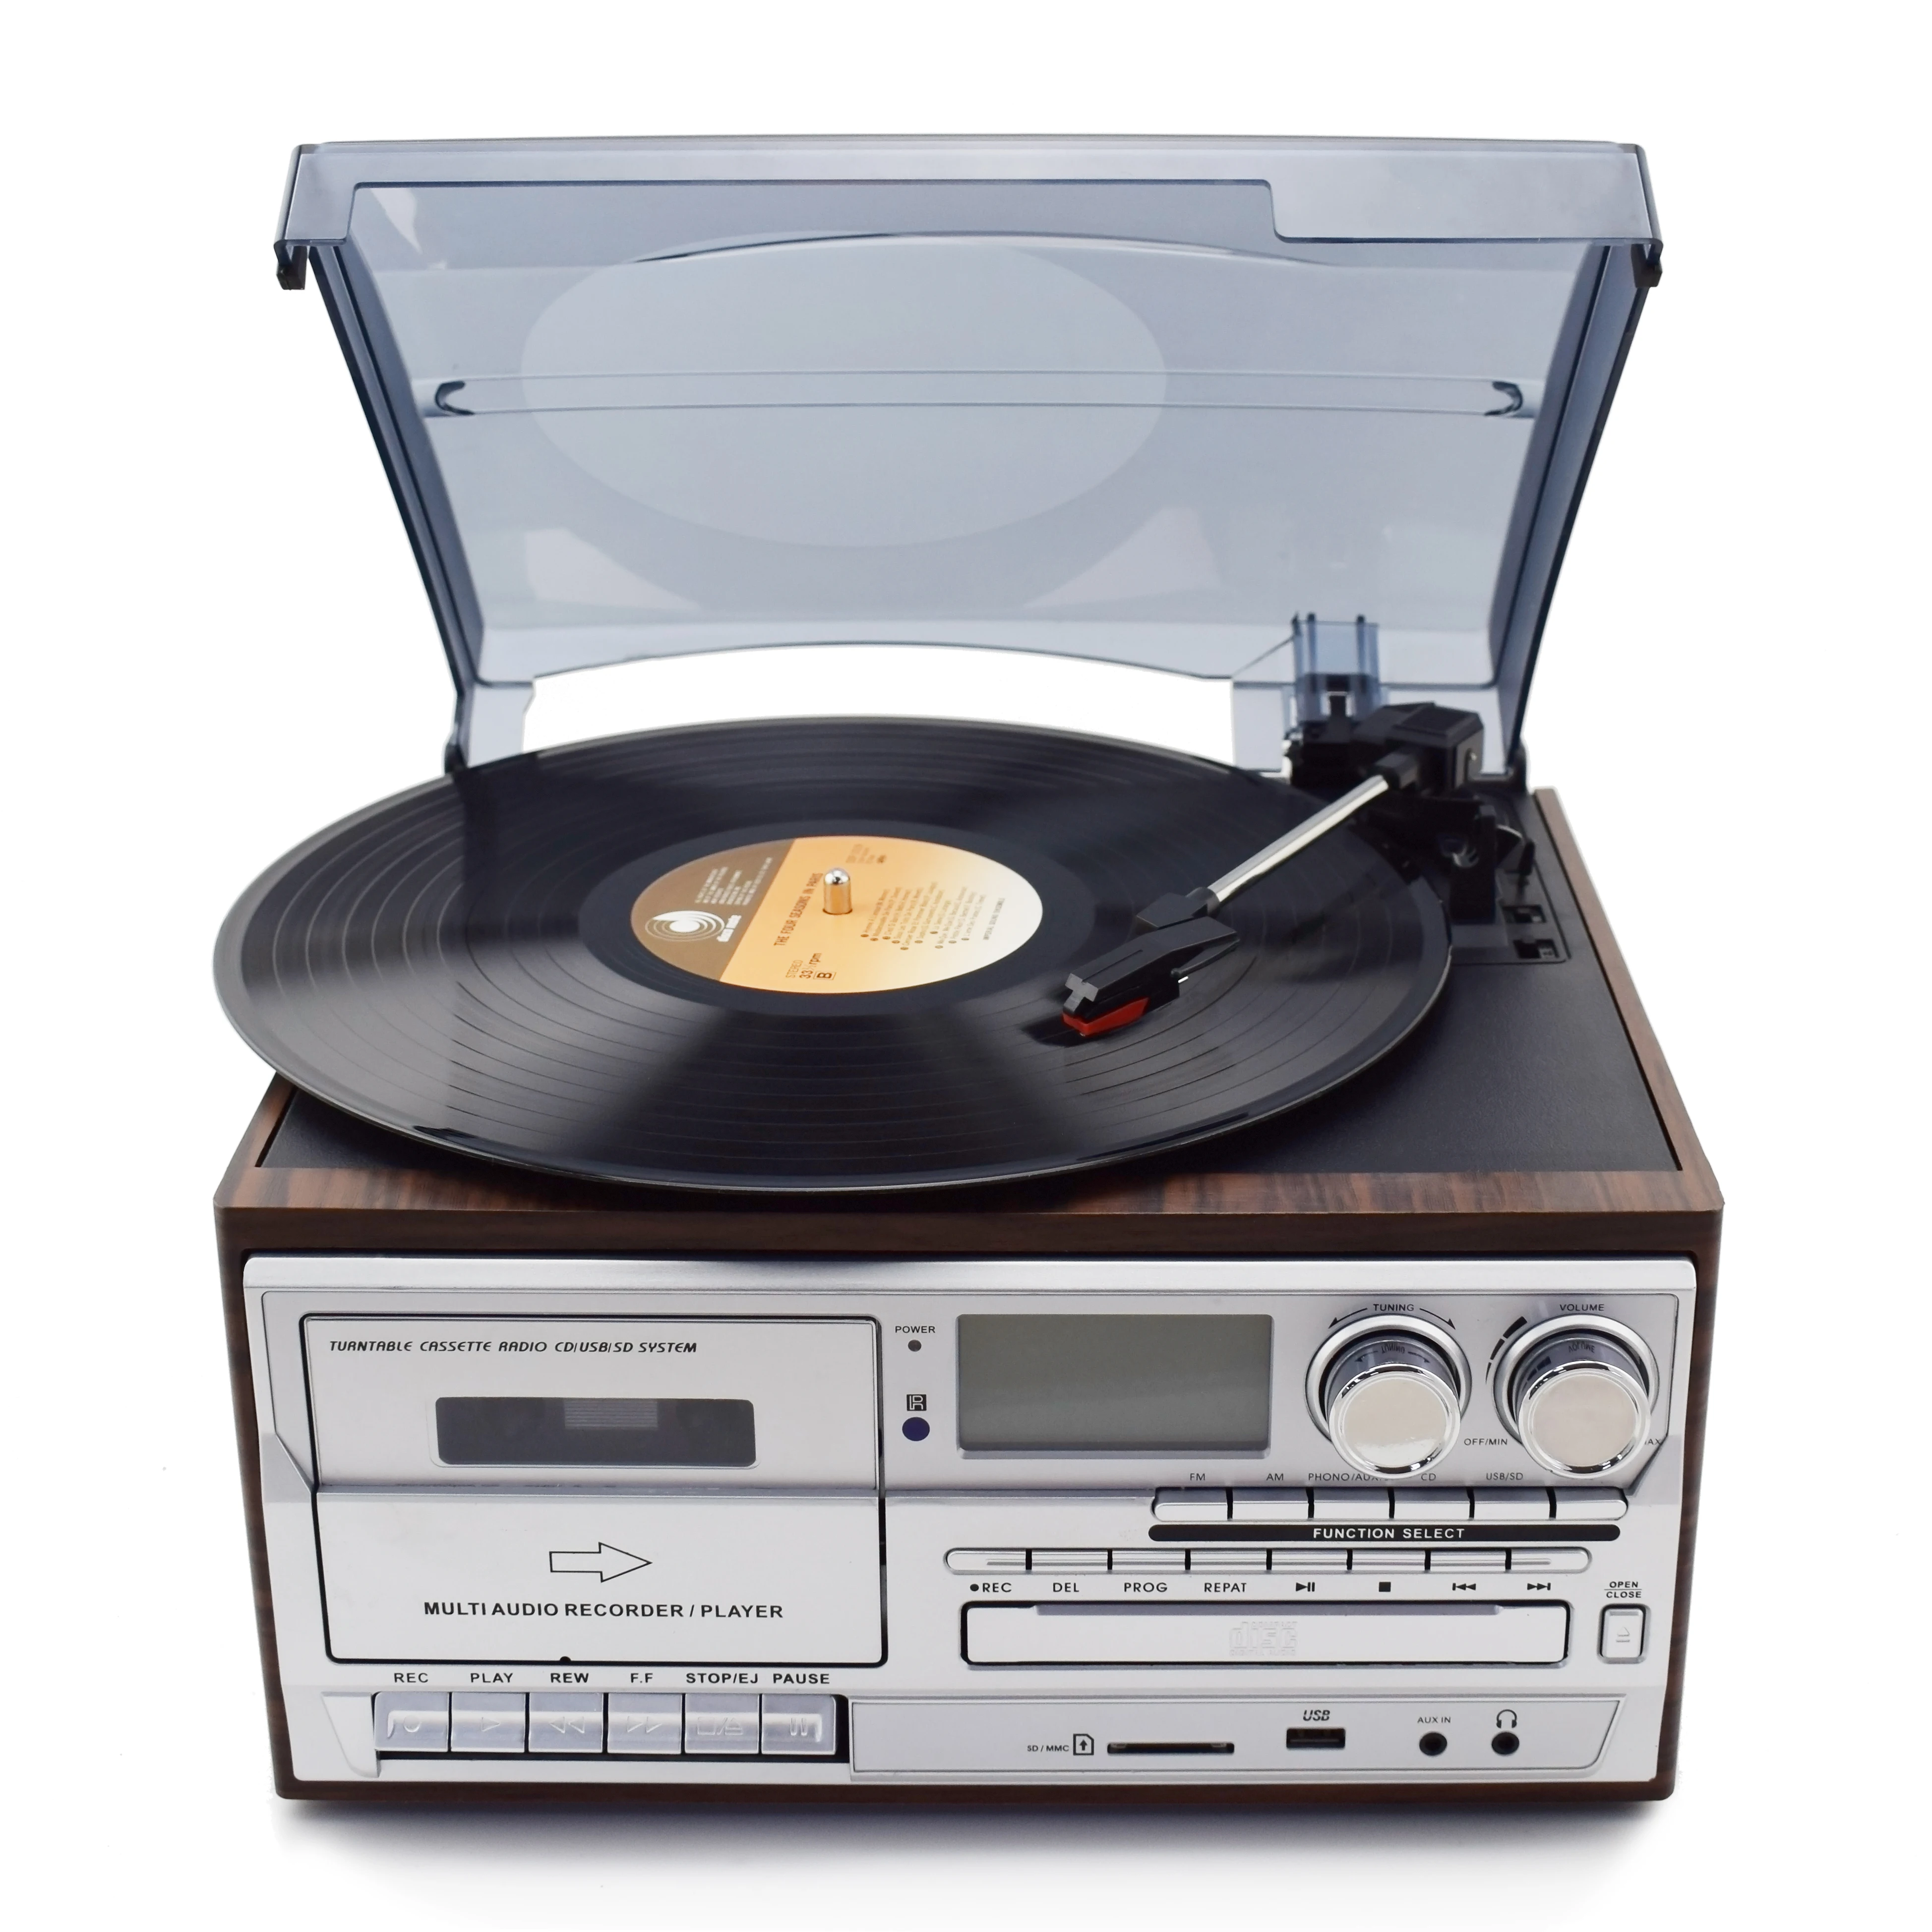 Fed up gesture mirror 2019 Hot Sale Factory Supply Multi Audio Retro Gramophone Turntable Record  Player With Cd Usb Cassette Encoding - Buy Record Player,Cd Turntable Player ,Turntable Record Player Product on Alibaba.com